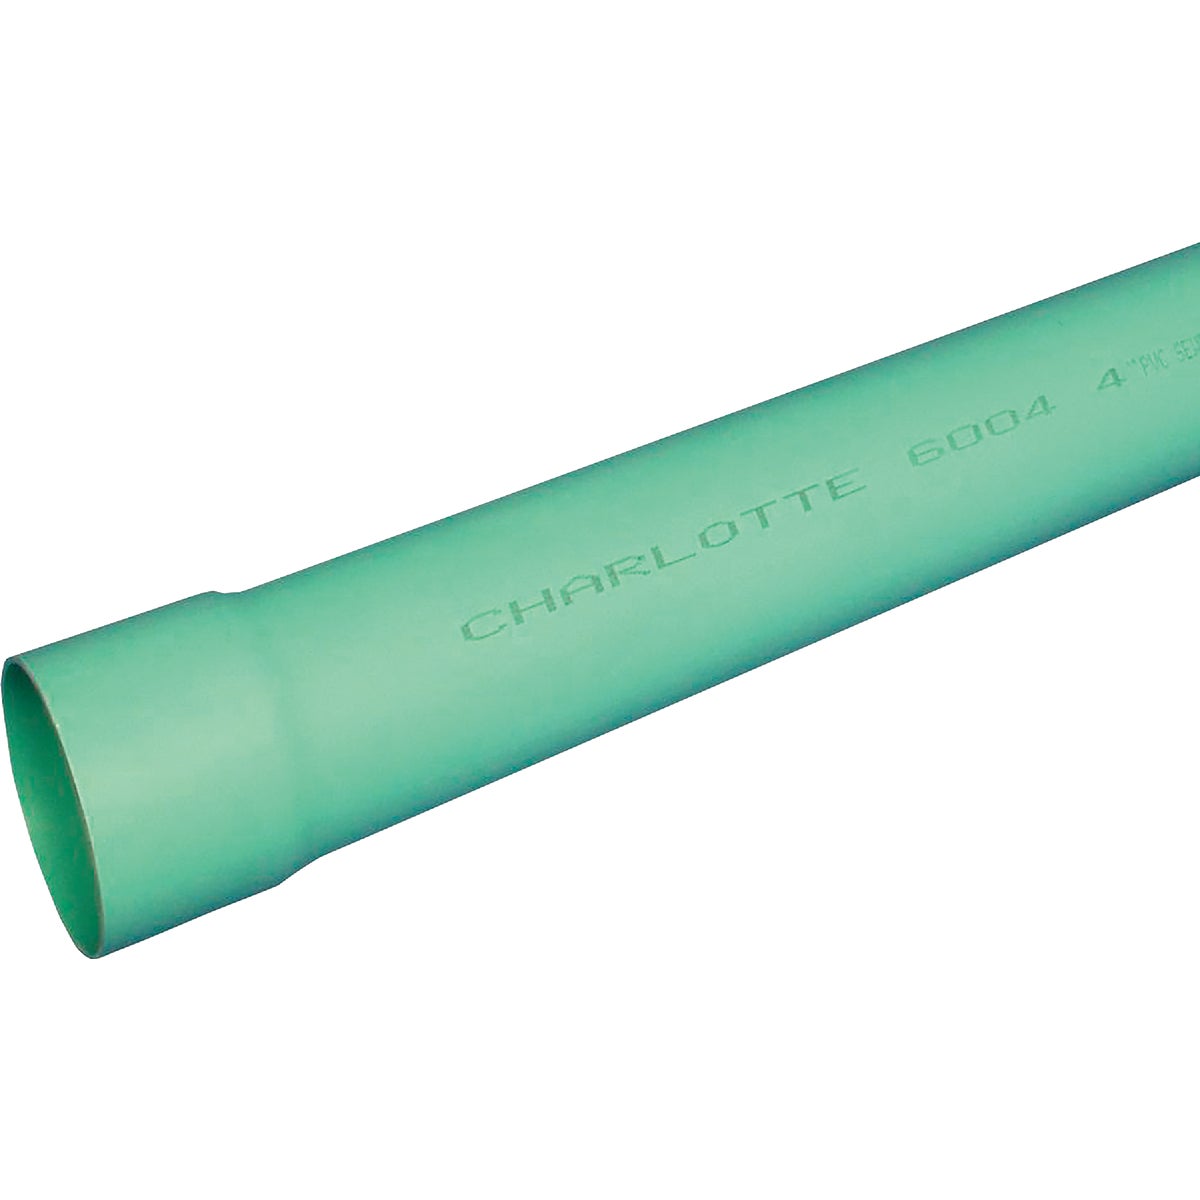 Item 409618, SDR 35 sewer main pipe is for sewer and storm drainage purposes only.